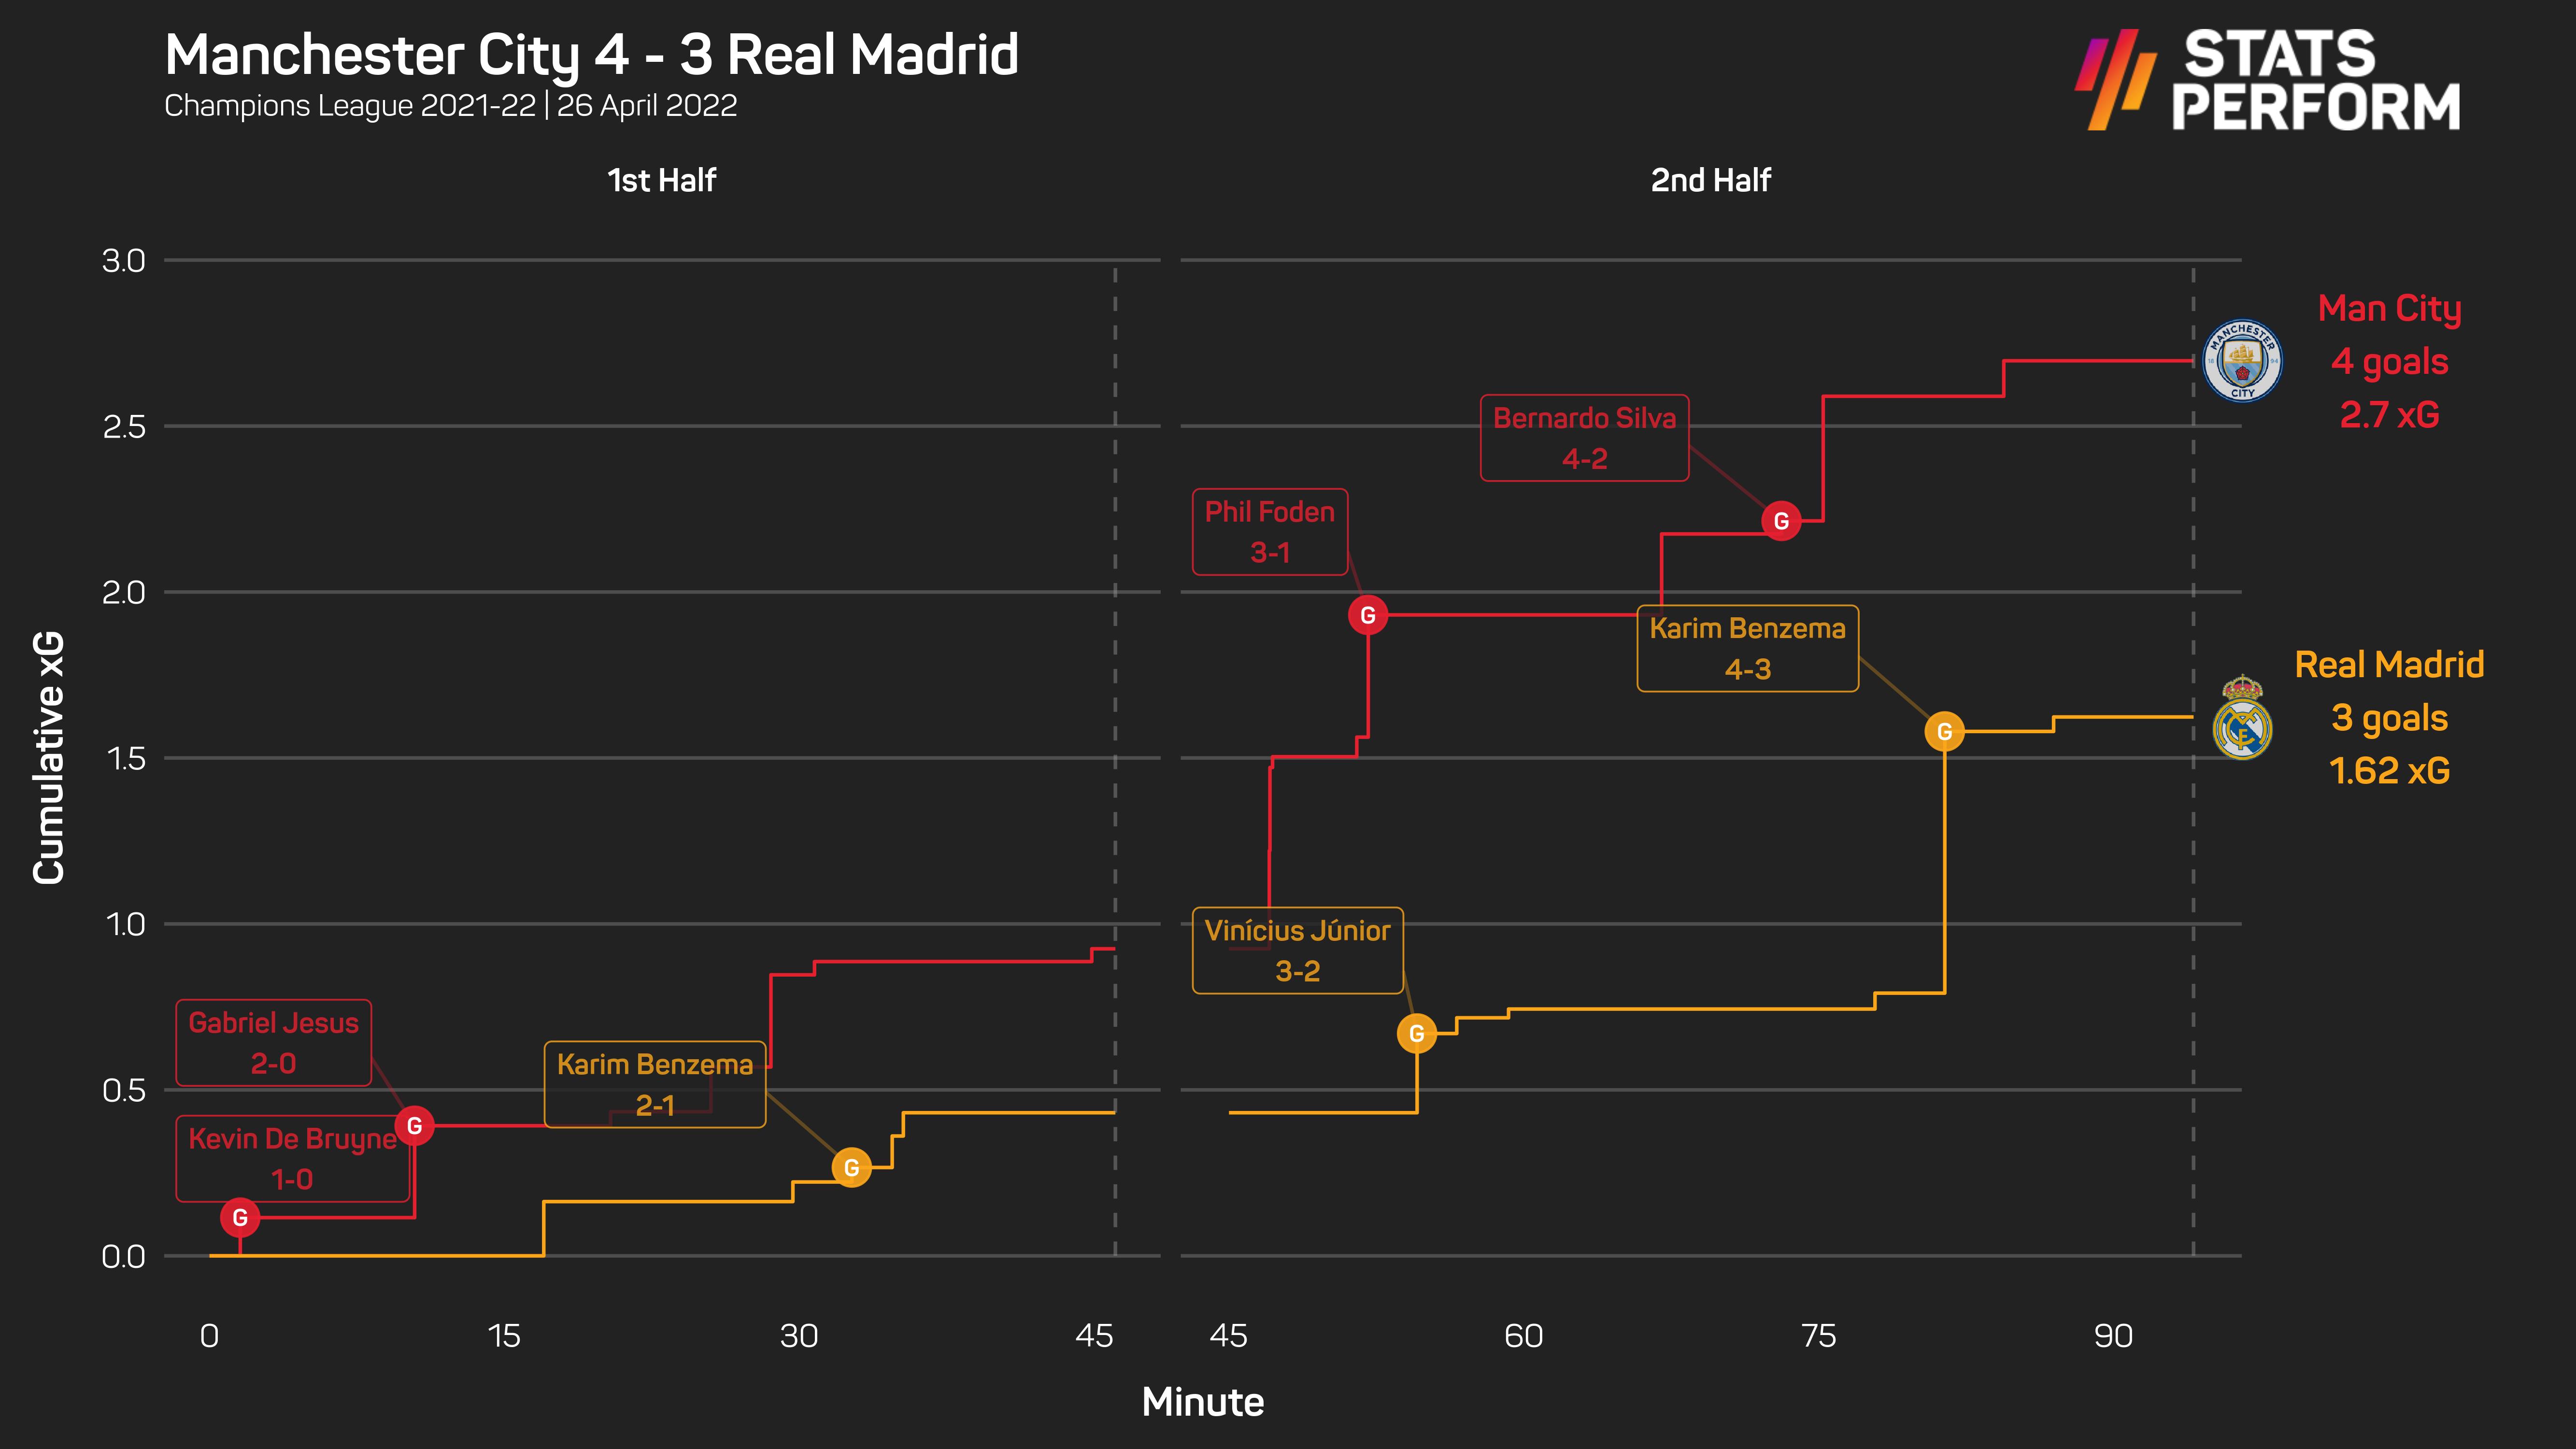 Real Madrid are 4-3 down on aggregate heading into the second leg